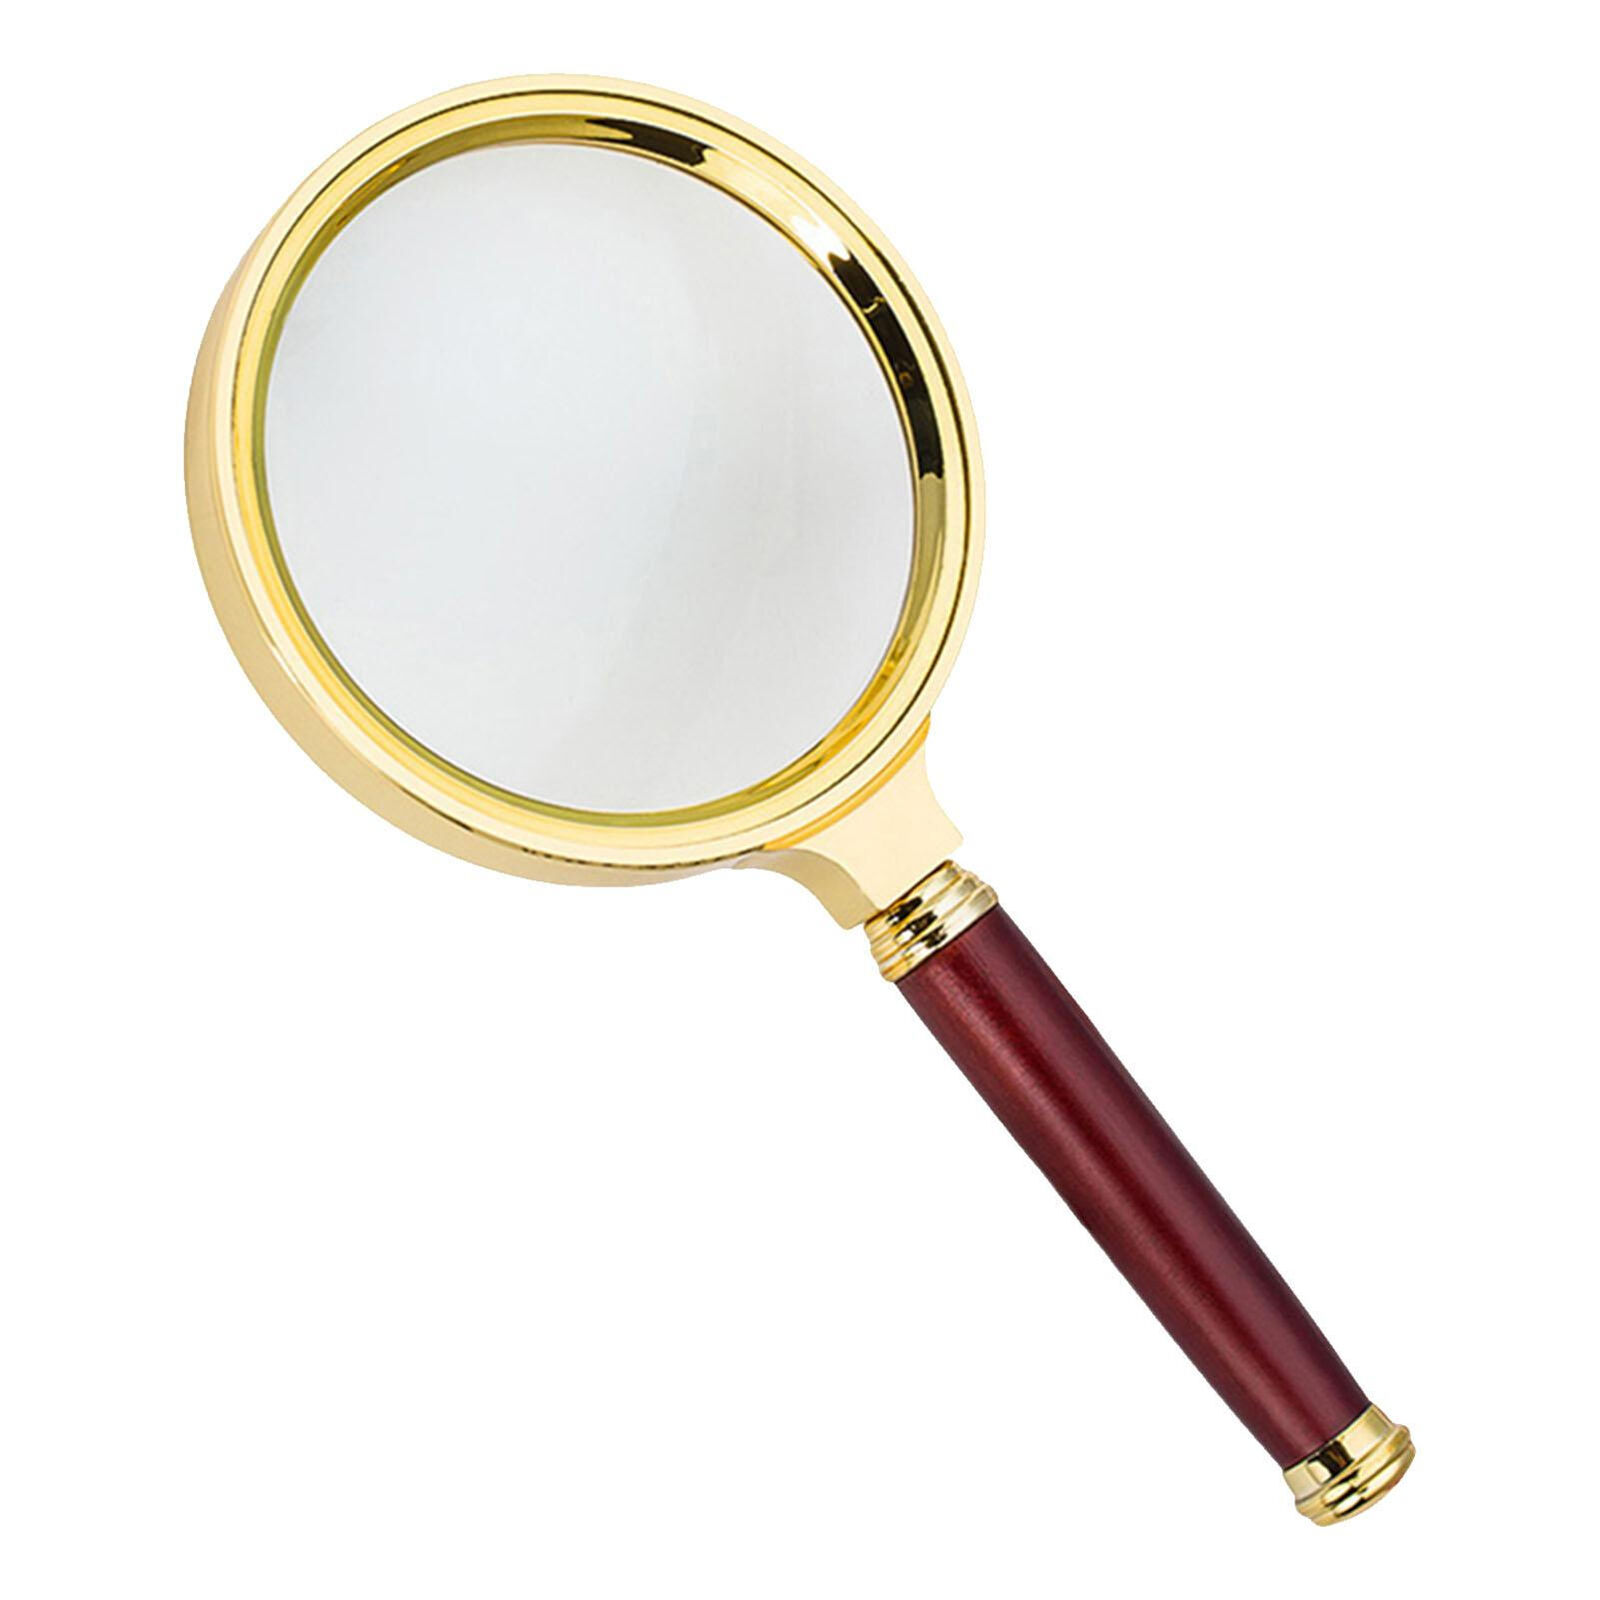 Vintage Magnifying Glass 10X Magnifying Glass Wood AntiqueBrass Magnifier